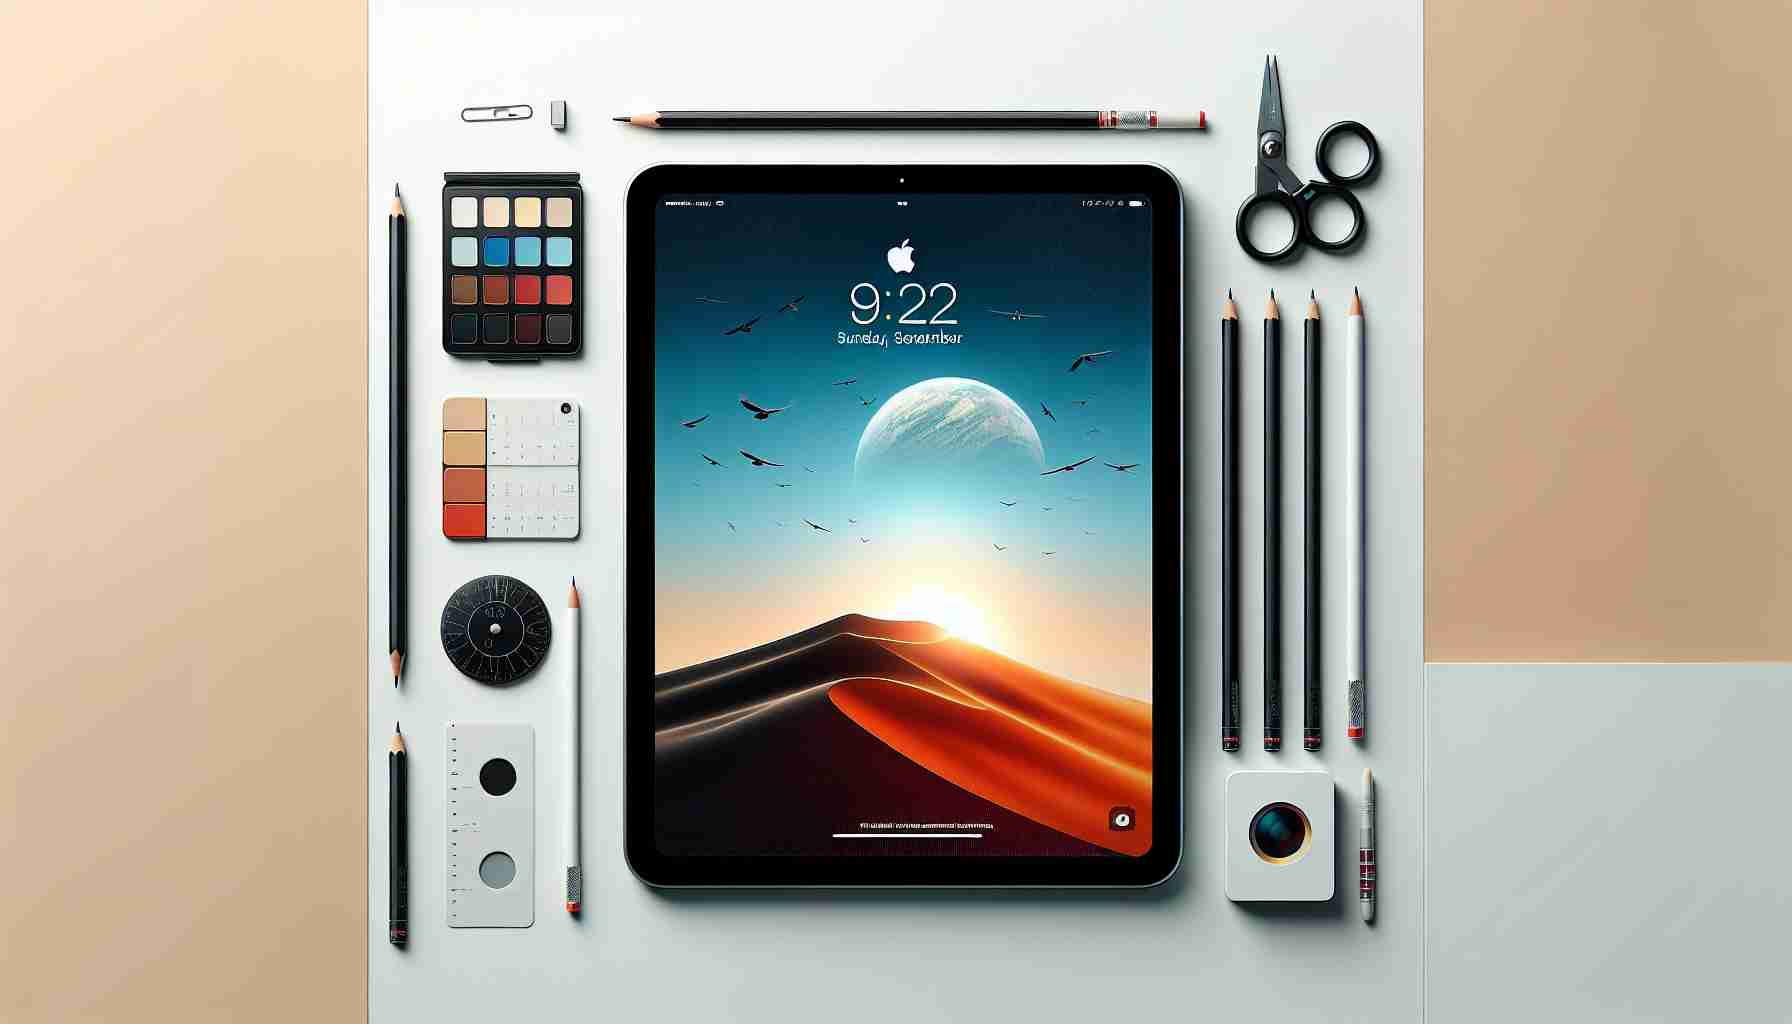 iPad 7th Generation: The Latest Version of Apple's Popular Tablet